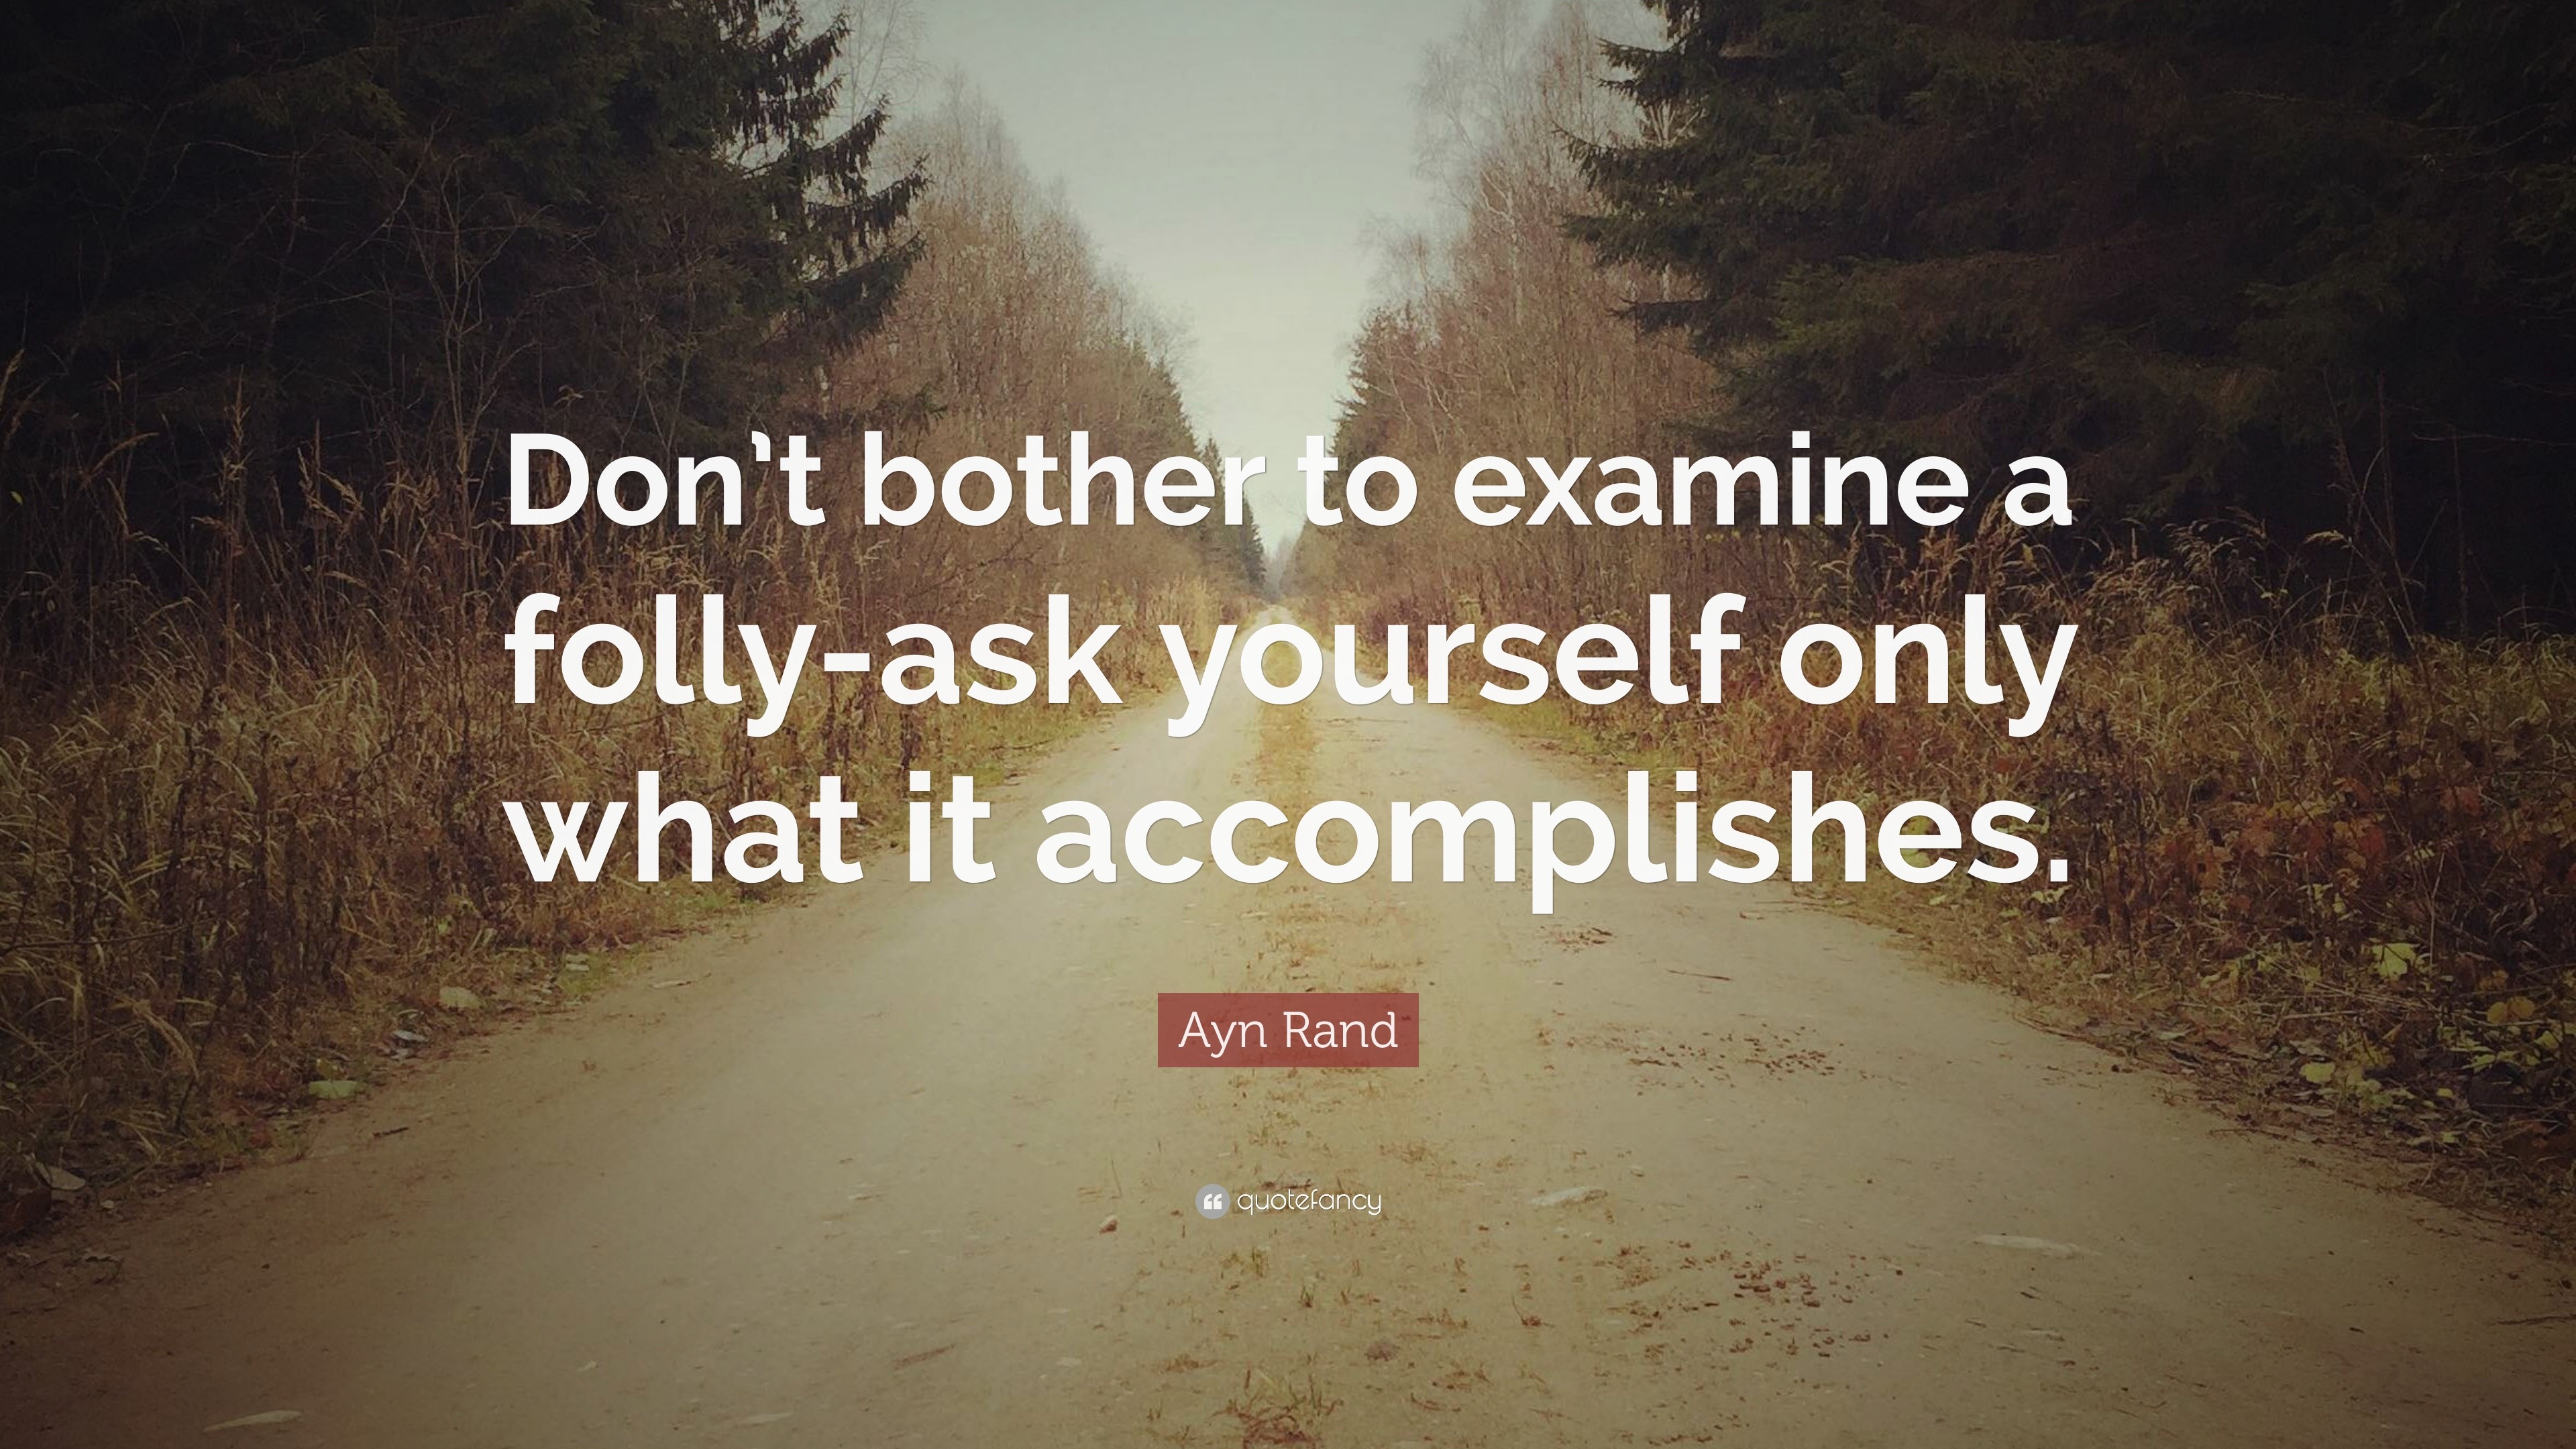 Ayn Rand Quote: “Don't bother to examine a folly-ask yourself only